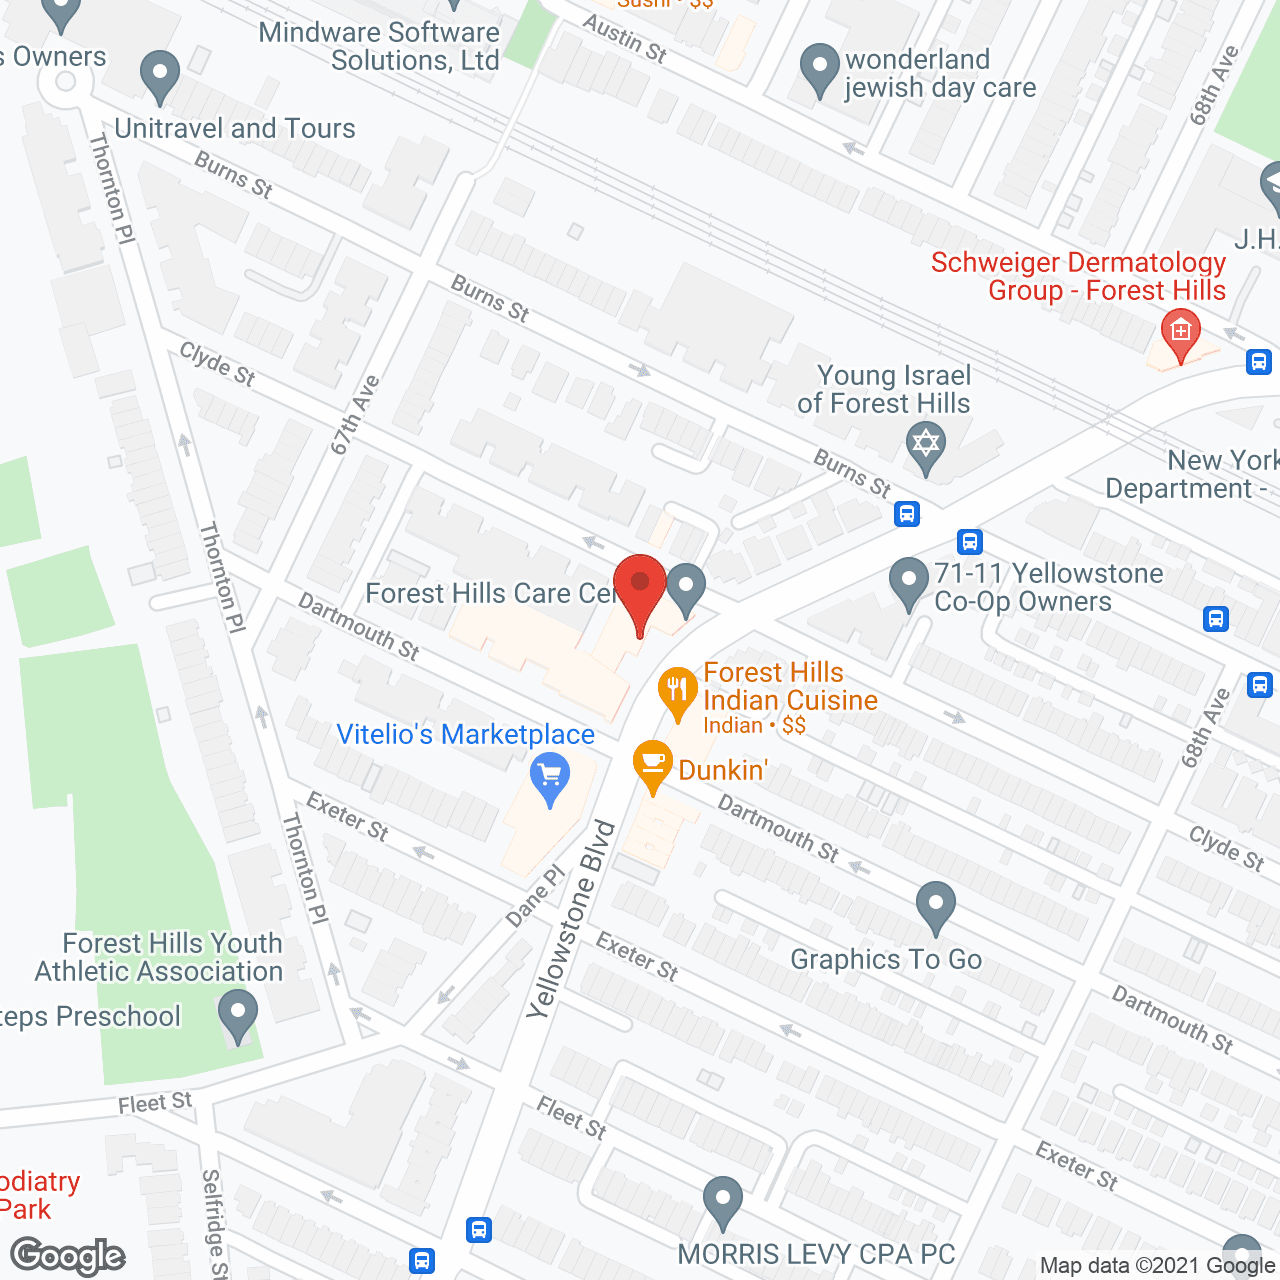 Forest Hills Care Center in google map